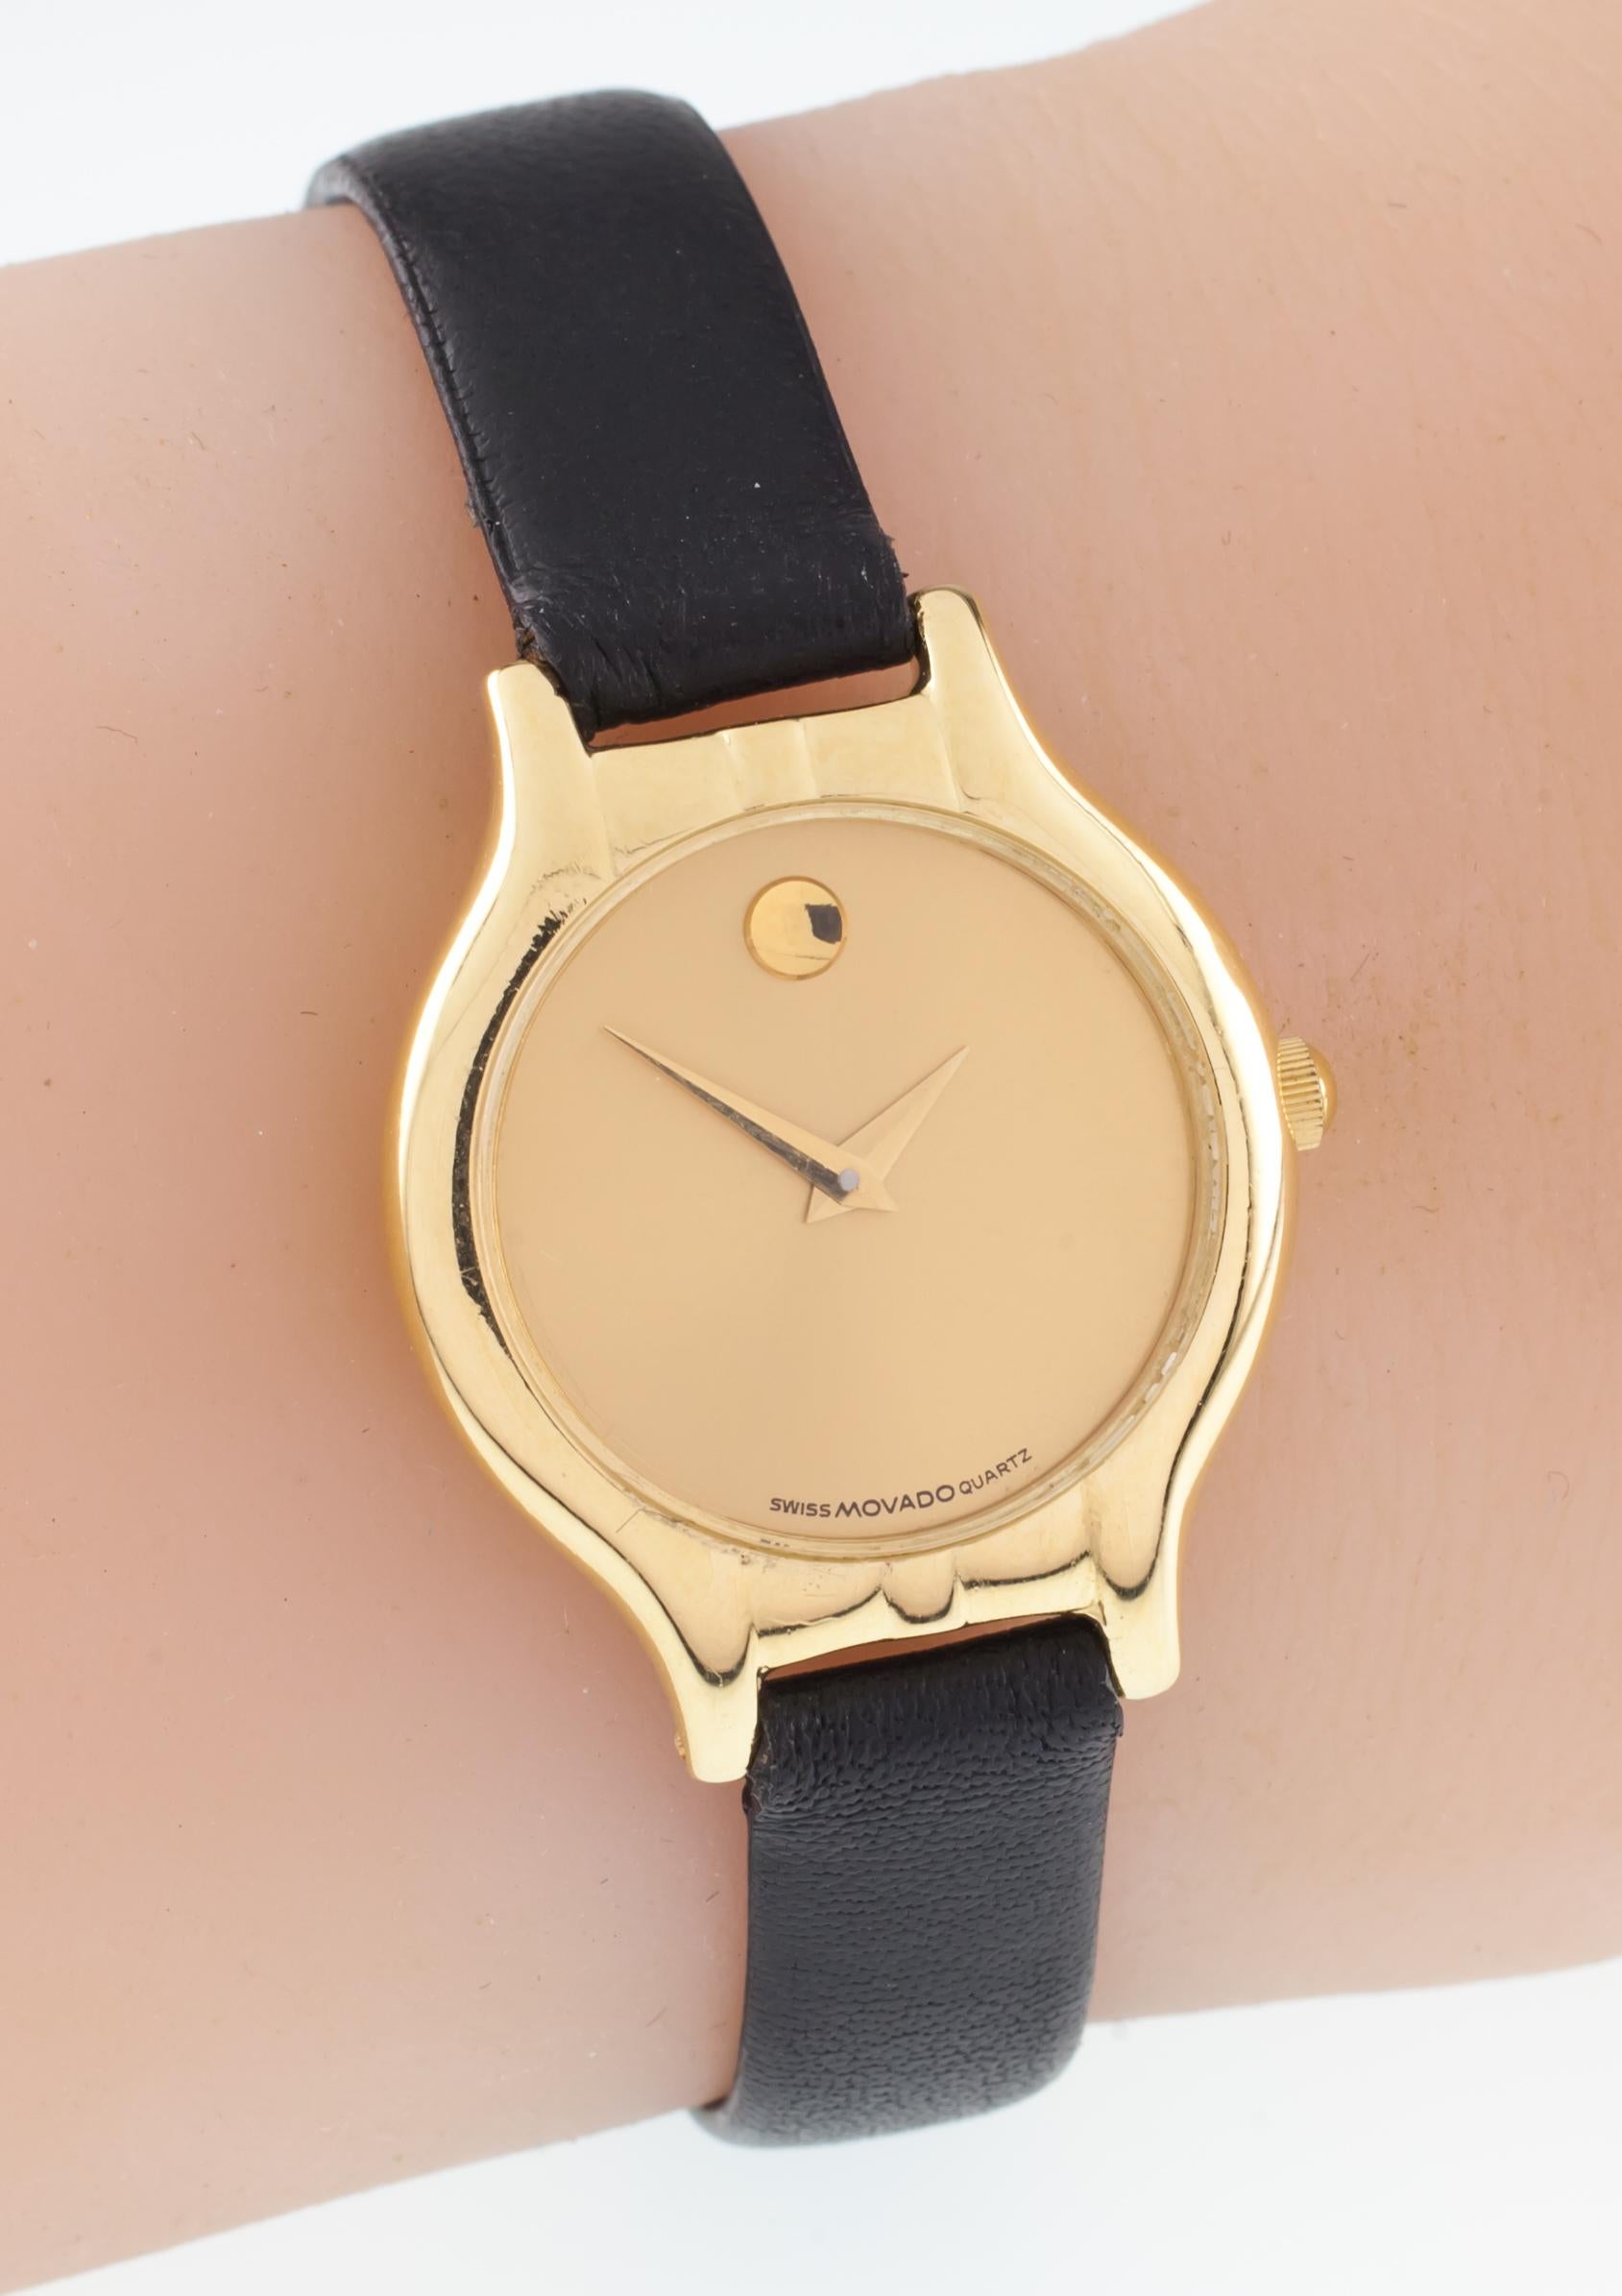 18k Yellow Gold Movado Watch w/ Black Leather Band Nice!
Model #40-25-824
Serial #107347

18k Yellow Gold Case
24 mm in Diameter (25 mm w/ Crown)
Lug-to-Lug Distance = 30 mm
Lug-to-Lug Width = 10 mm
Thickness = 5 mm

Gold Dial w/ Gold Hands (M + H)